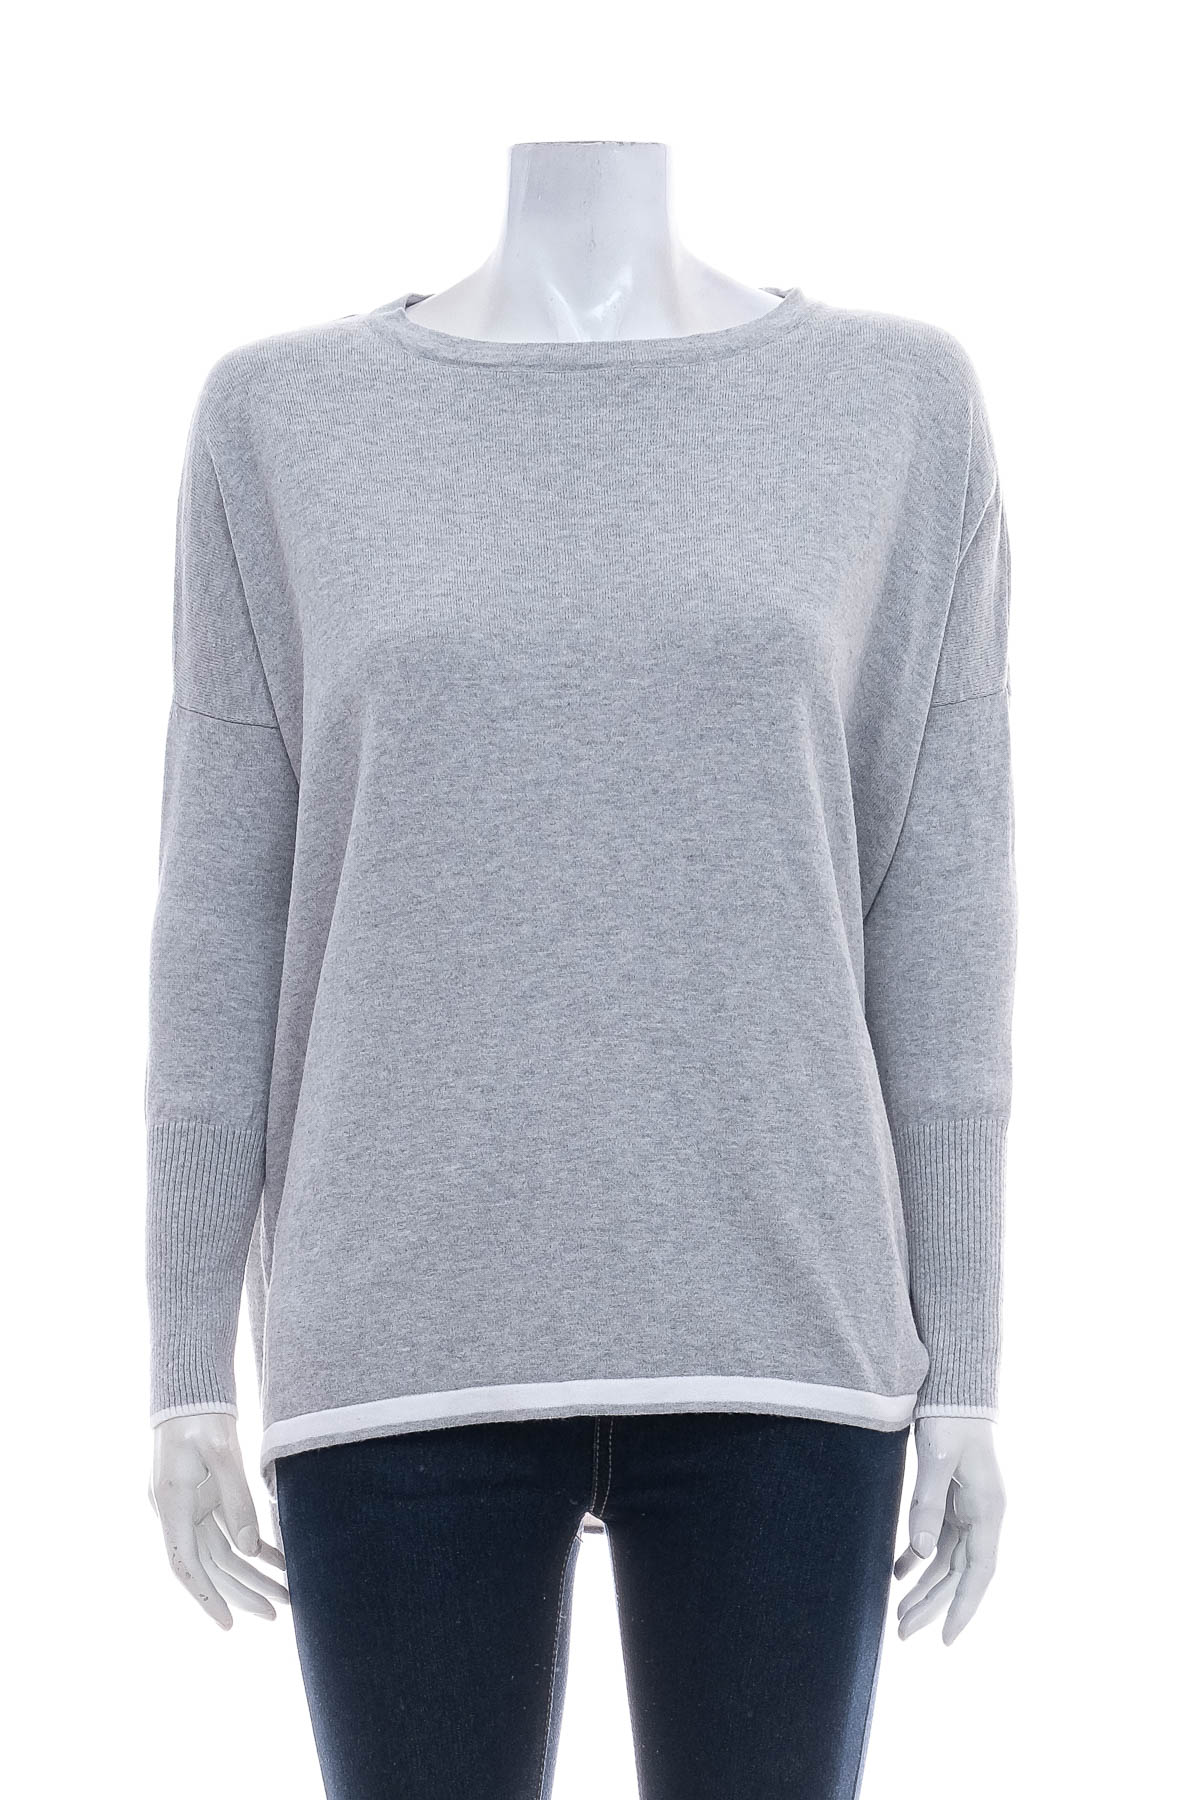 Women's sweater - Target Collection - 0